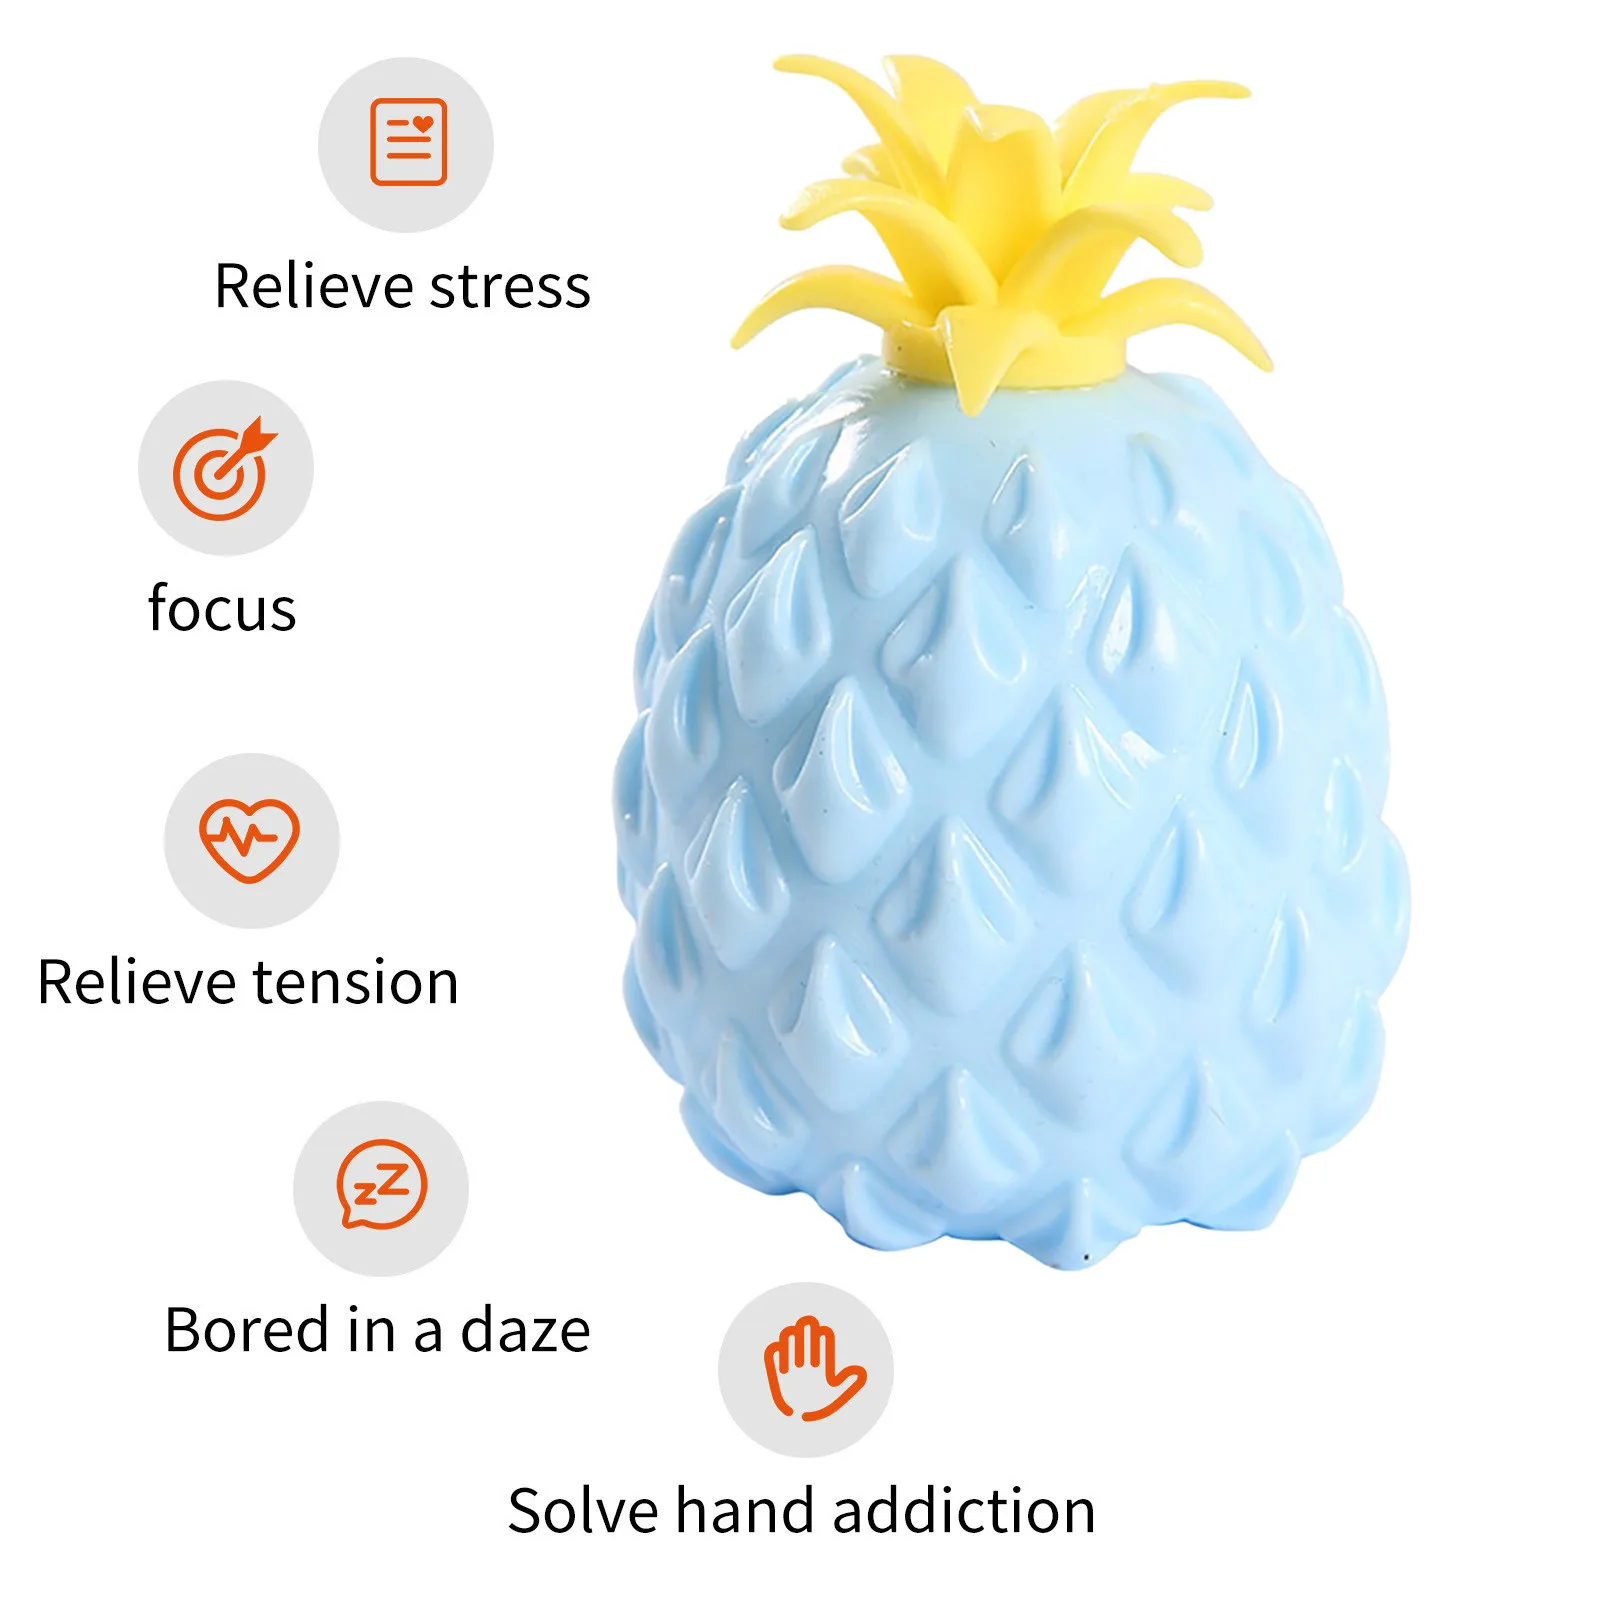 Pineapple Stress Balls Squishy Ball Fidget Toys (1 Pack) Stretchy Fruit  Stress Relief Squeeze Ball for Adults and Party Favors, Ideal for Anxiety